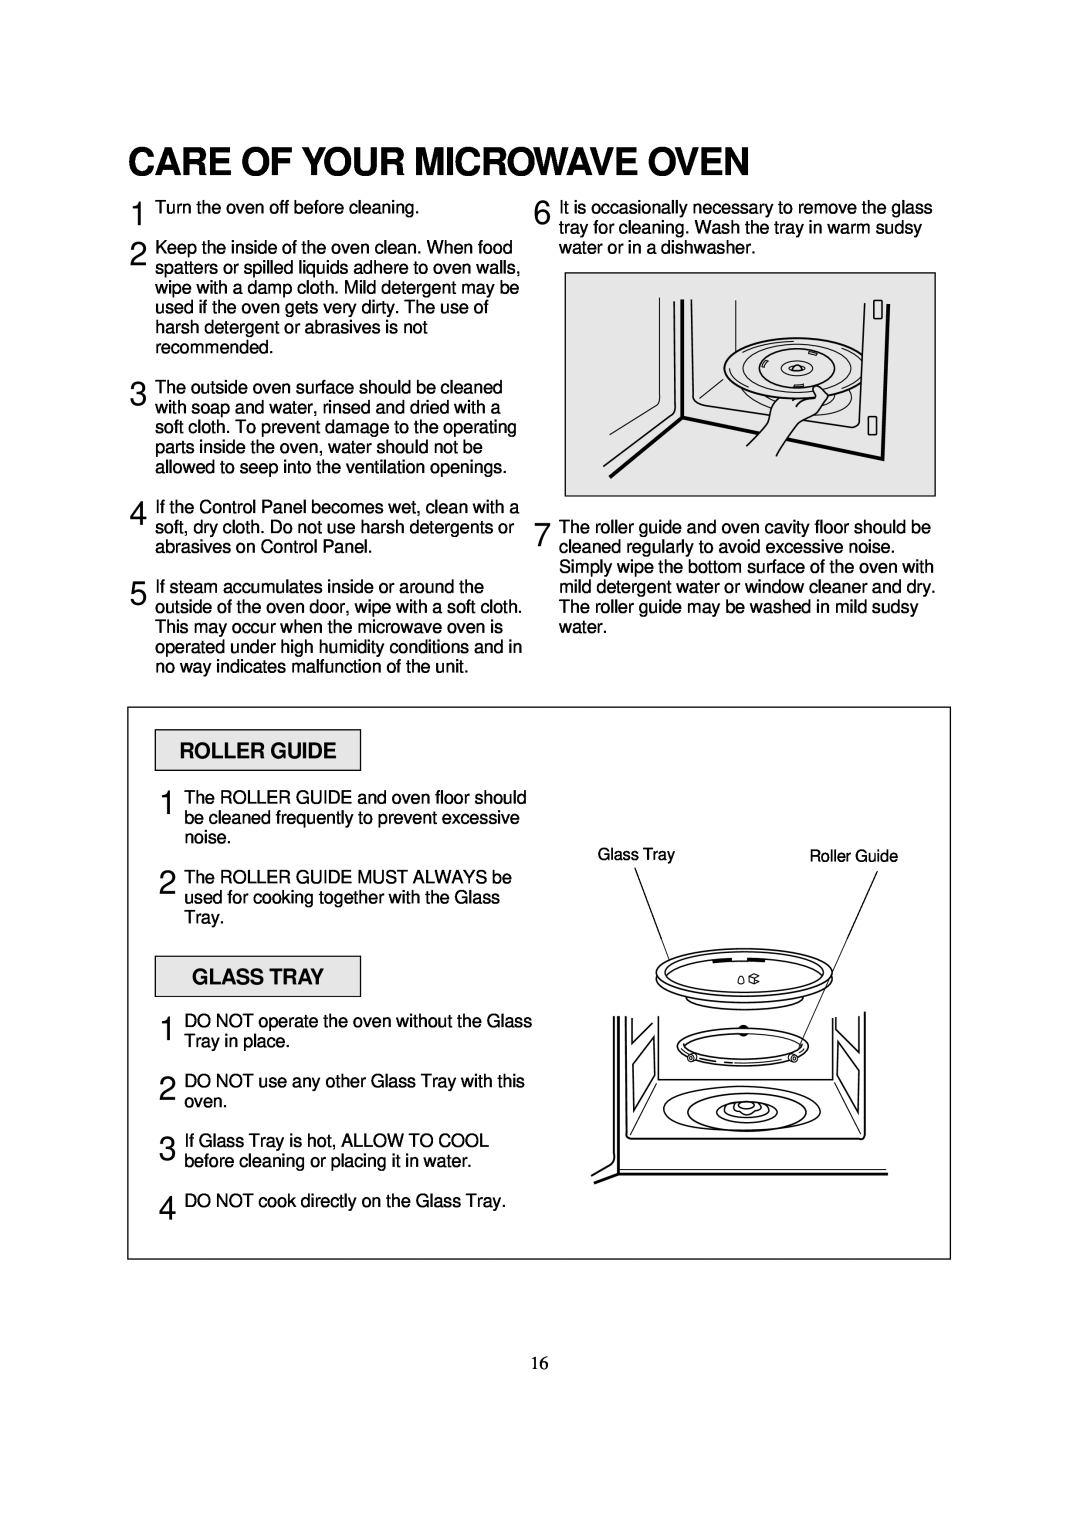 Magic Chef MCD990BF, MCD990WF instruction manual Care Of Your Microwave Oven, Roller Guide, Glass Tray 